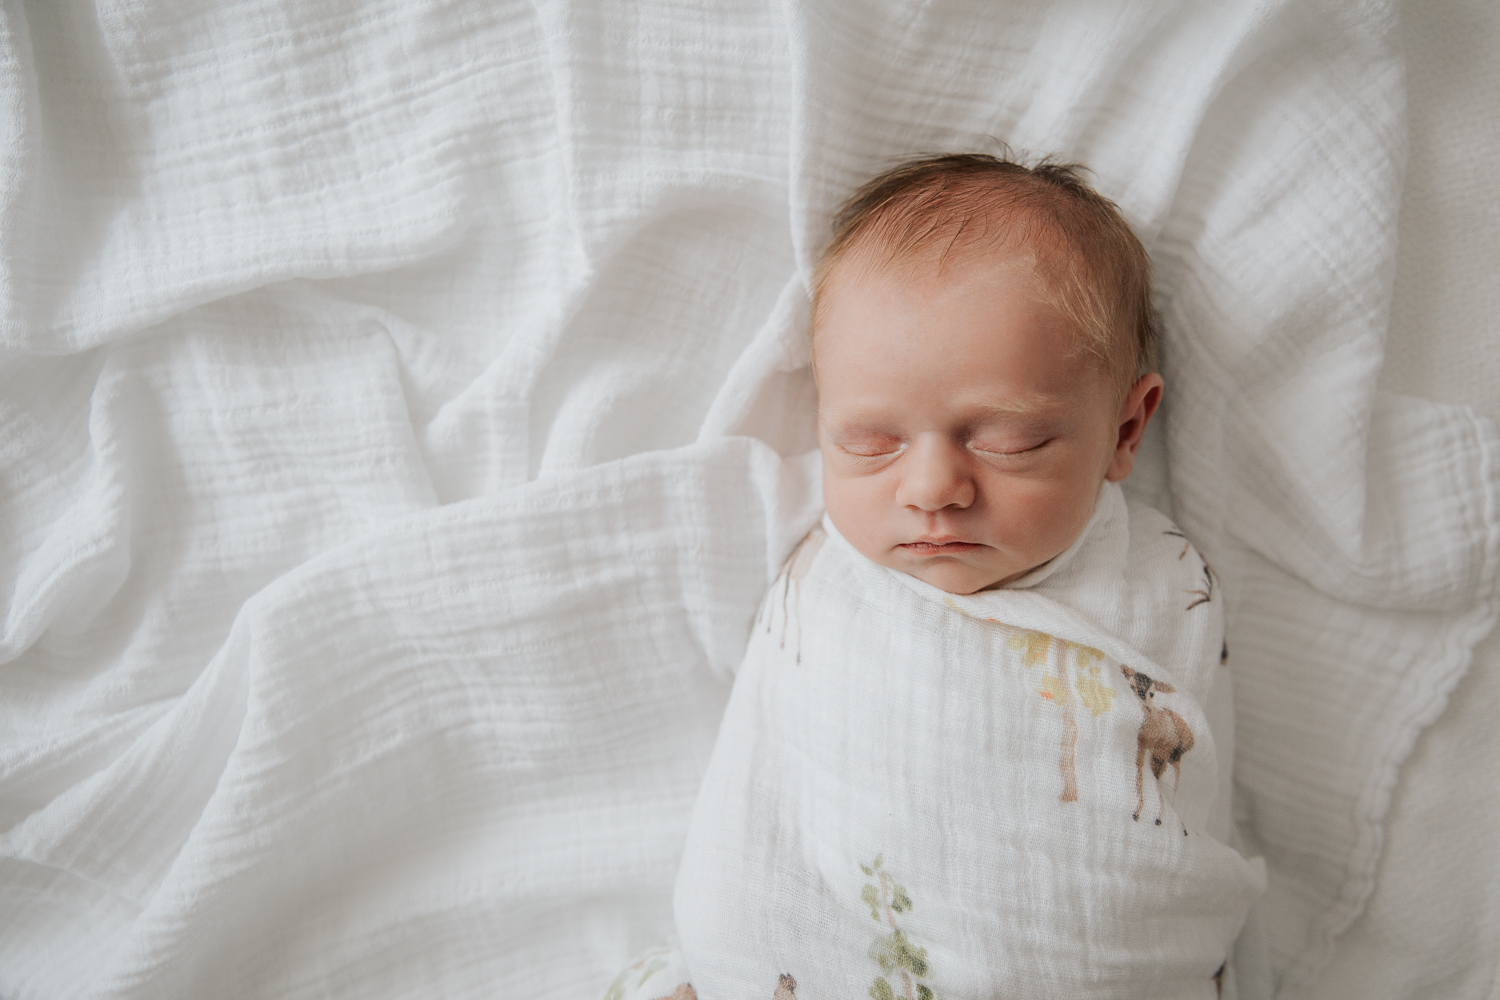 3 week old swaddled baby boy with red hair sleeping on bed - Newmarket In-Home Photos